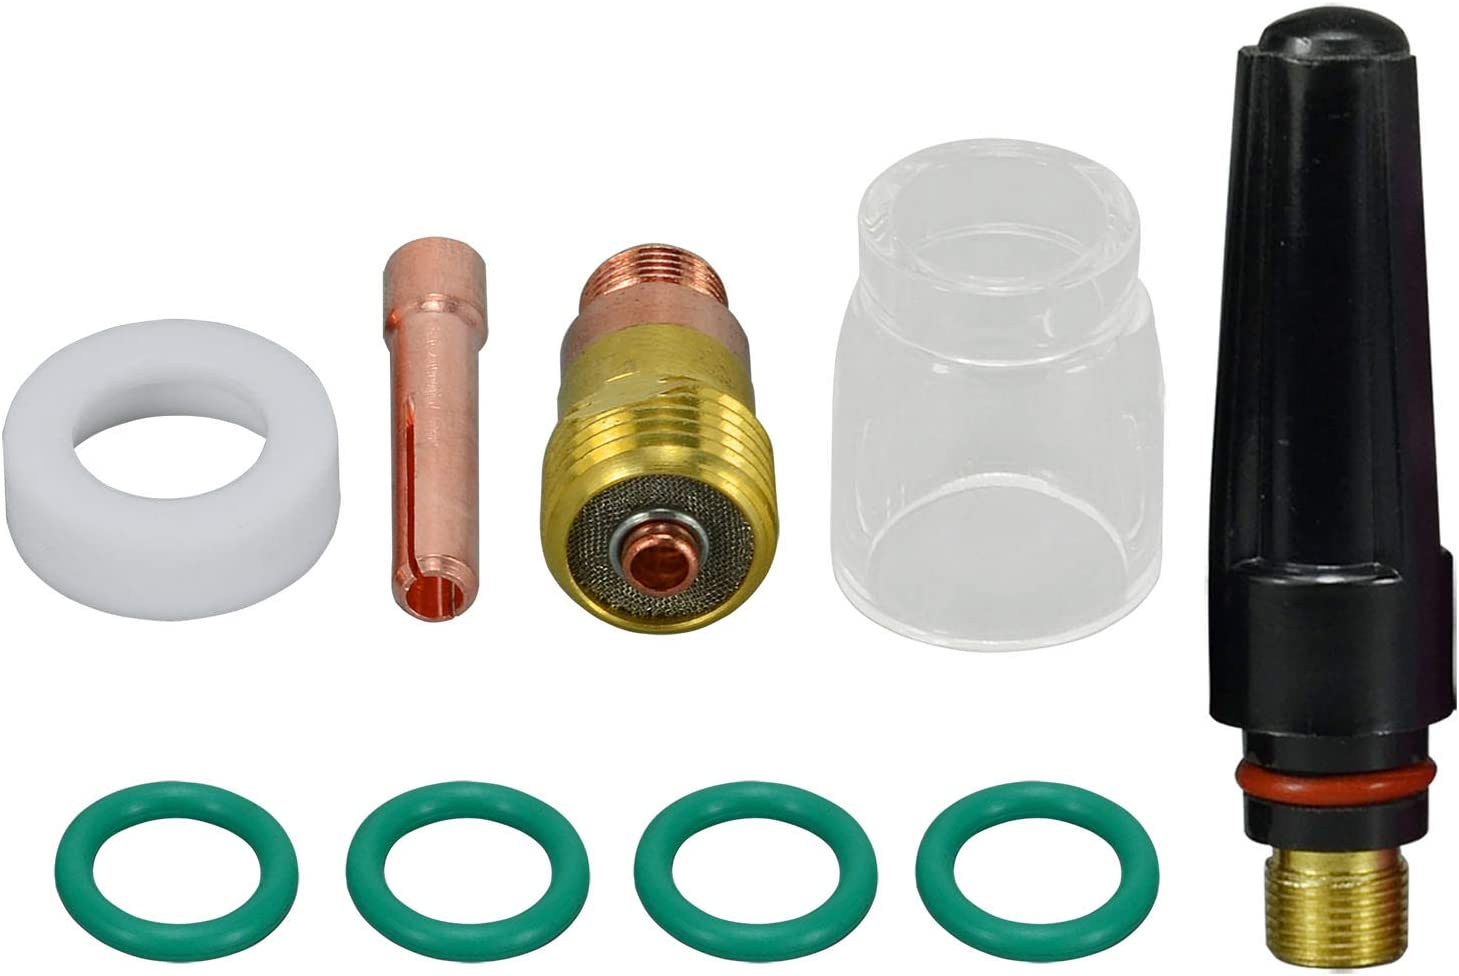 TIG Stubby Gas Lens Collet Body 1.6mm 17GL116 Collet 10N23S Insulated Glass Cup Kit for DB SR WP 17 18 26 TIG Torch Welding 9pcs